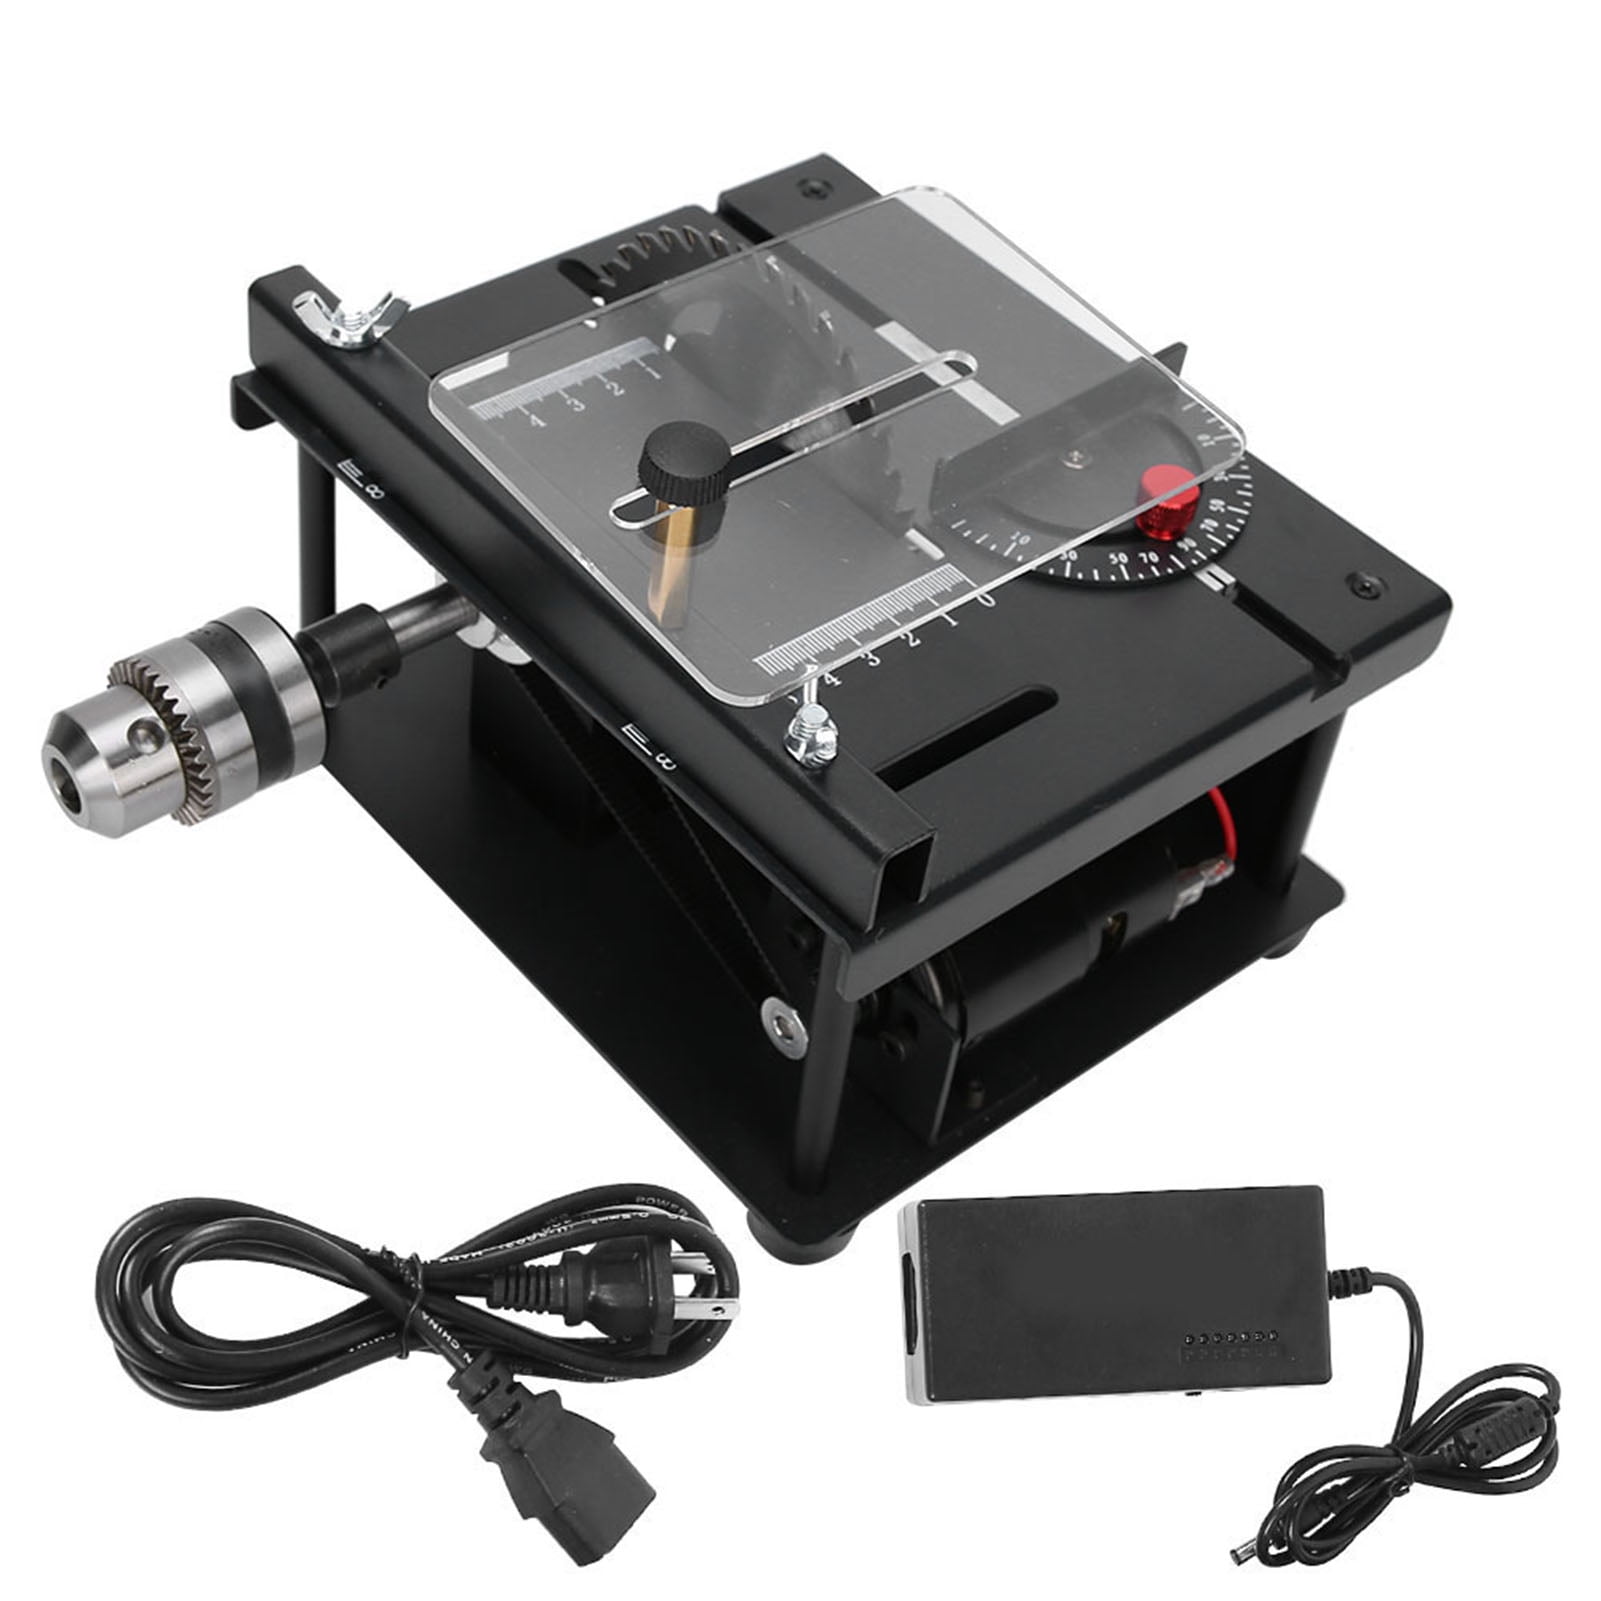 Multifunctional Table Saw, Rust Resistance Low Noise 96W Table Saw Machine  Stainless Steel US Plug 110-240V for Model Making